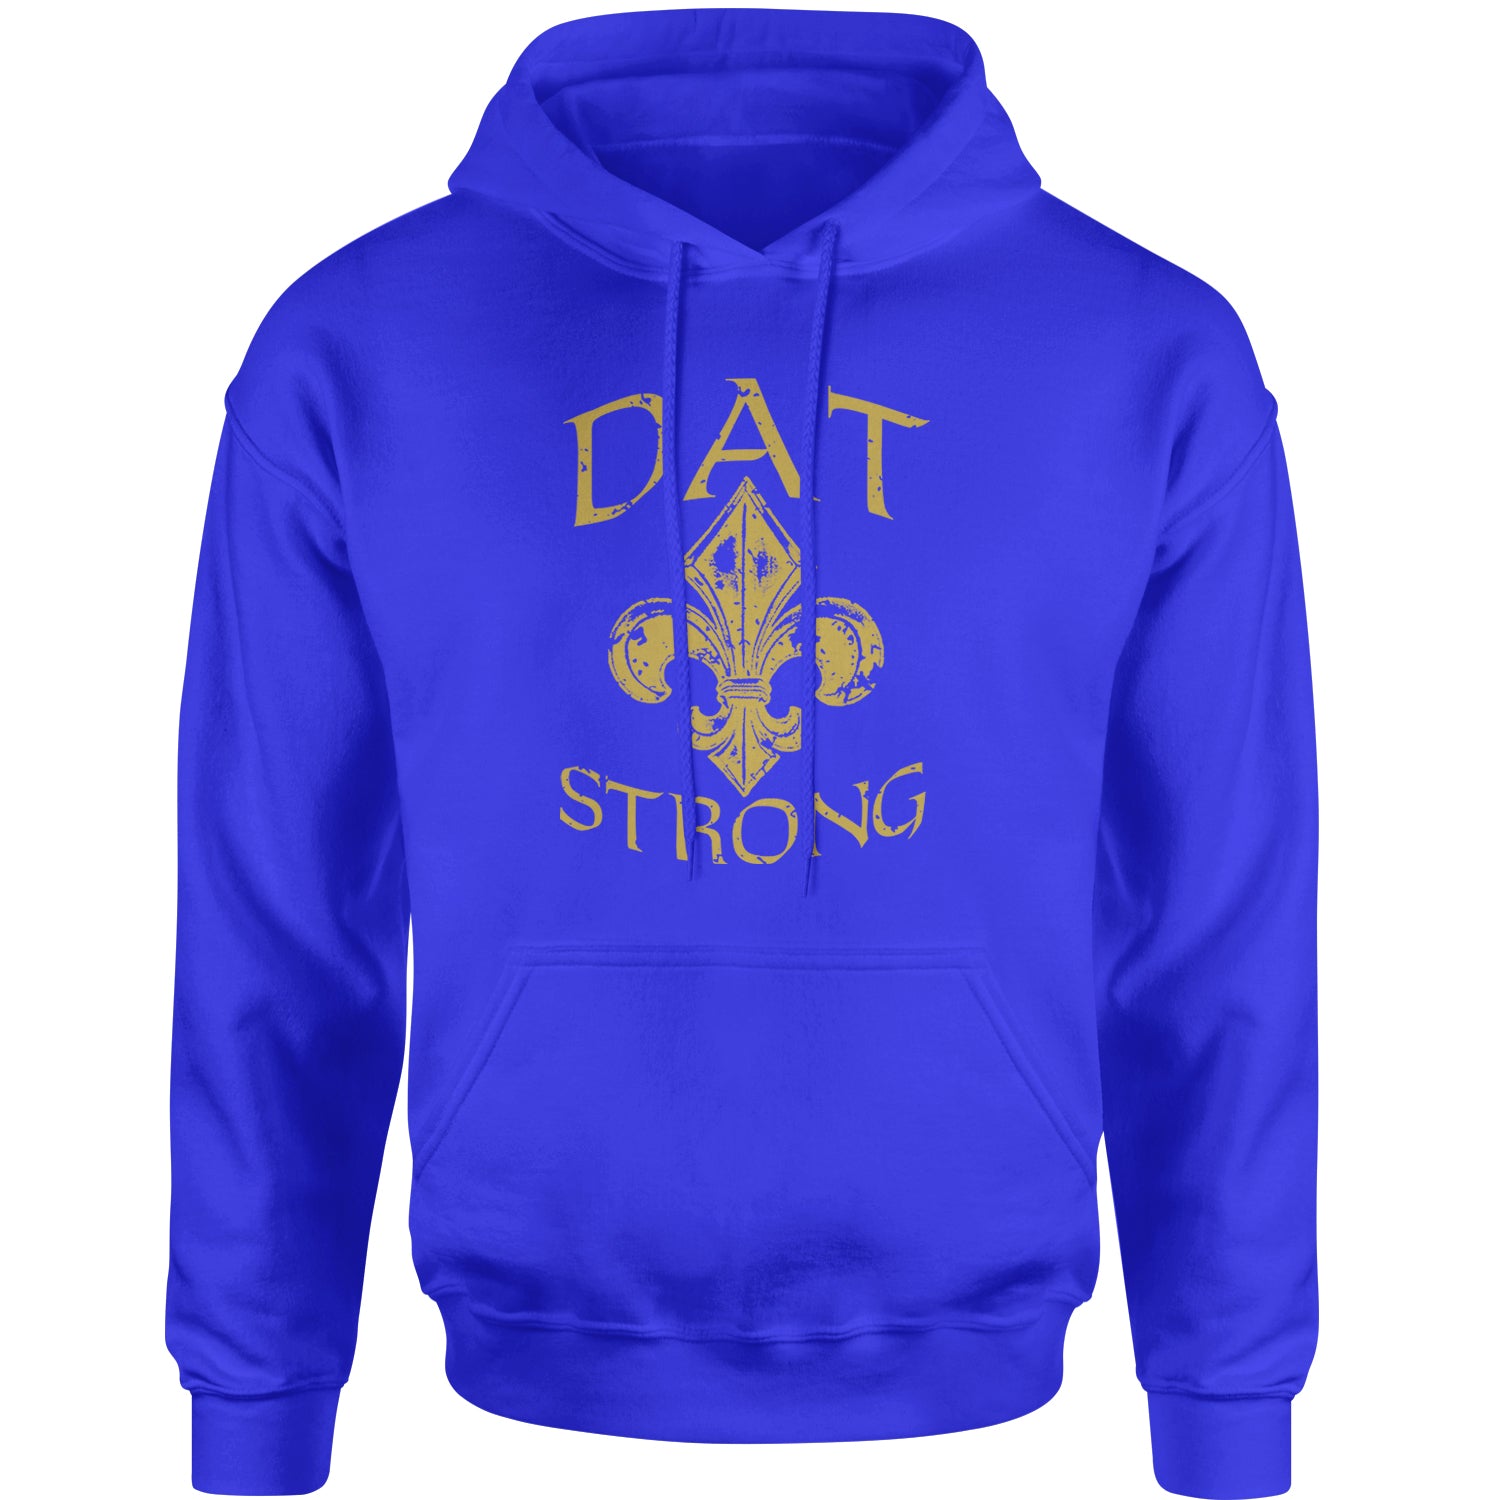 Dat Strong New Orleans Adult Hoodie Sweatshirt dat, de, fan, fleur, jersey, lis, new, orleans, sports, strong, who by Expression Tees